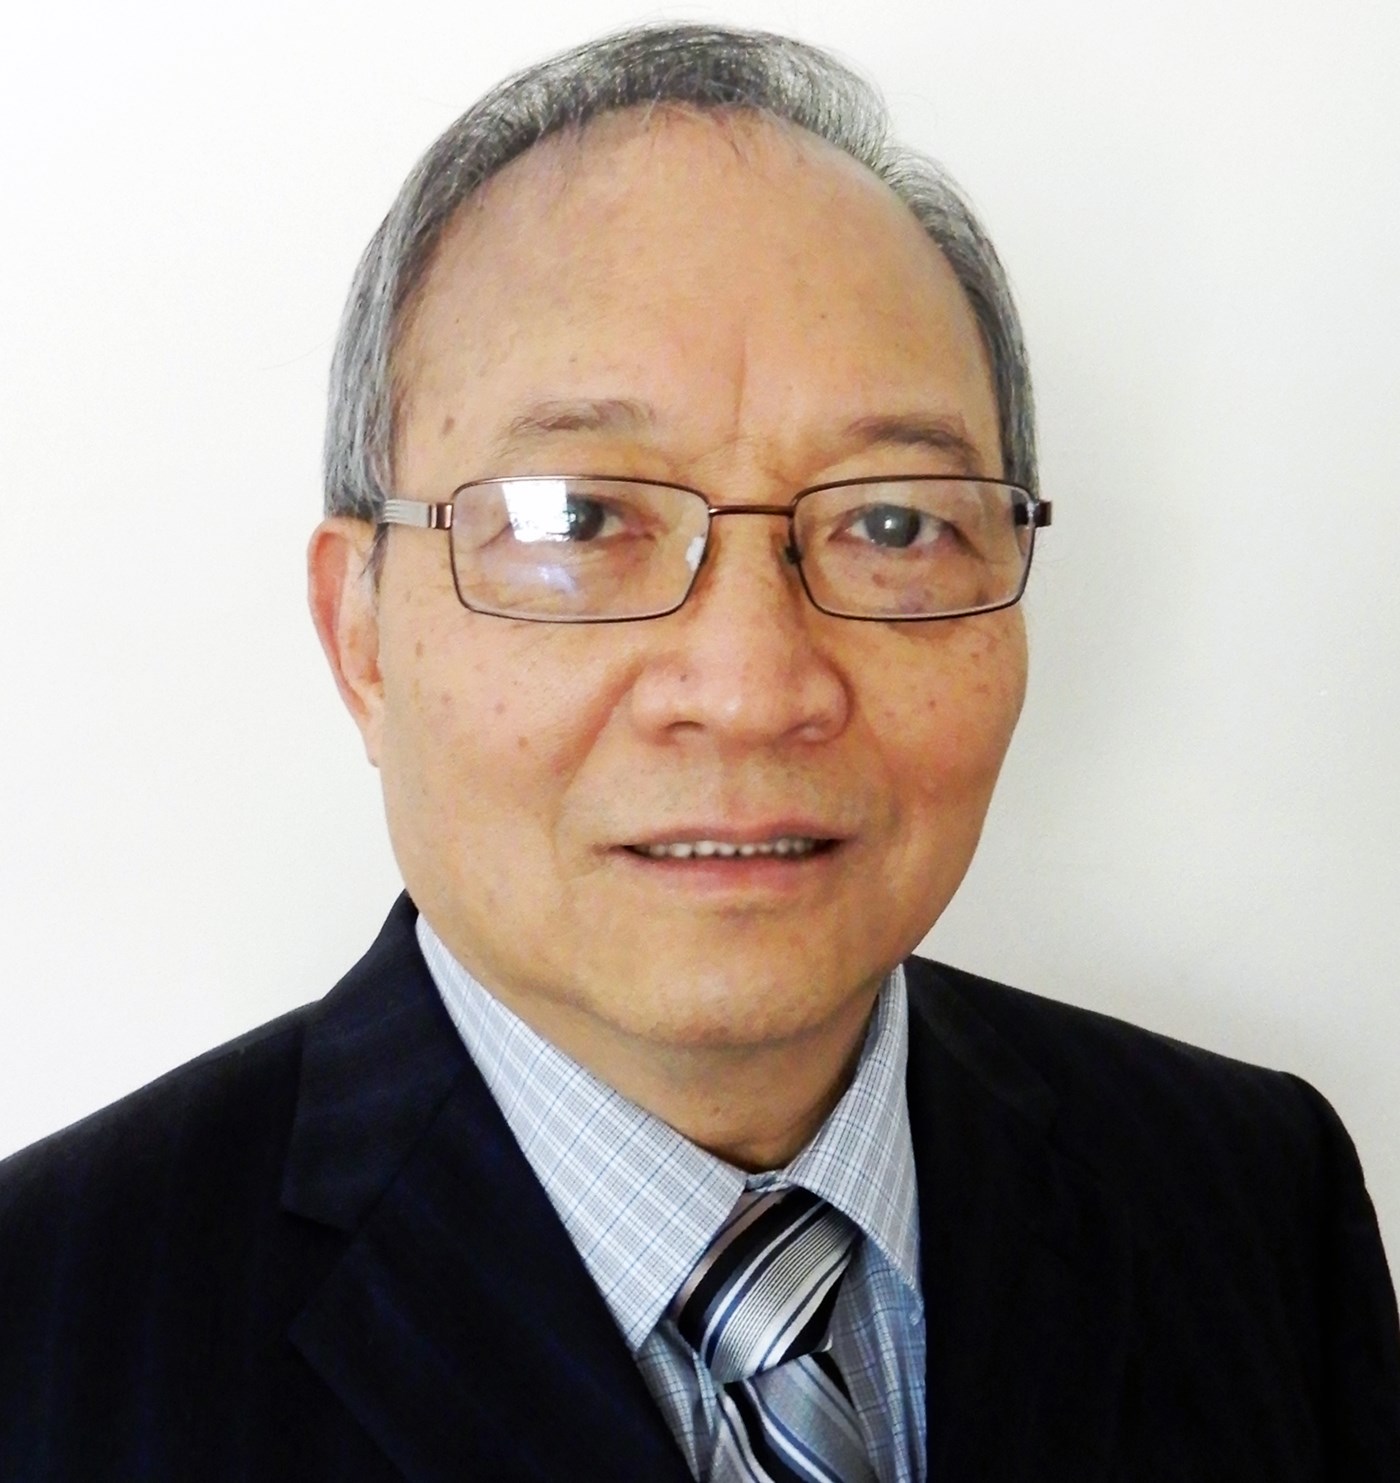 Long Chiang is a Professor in the Chemistry Department at UMass Lowell.